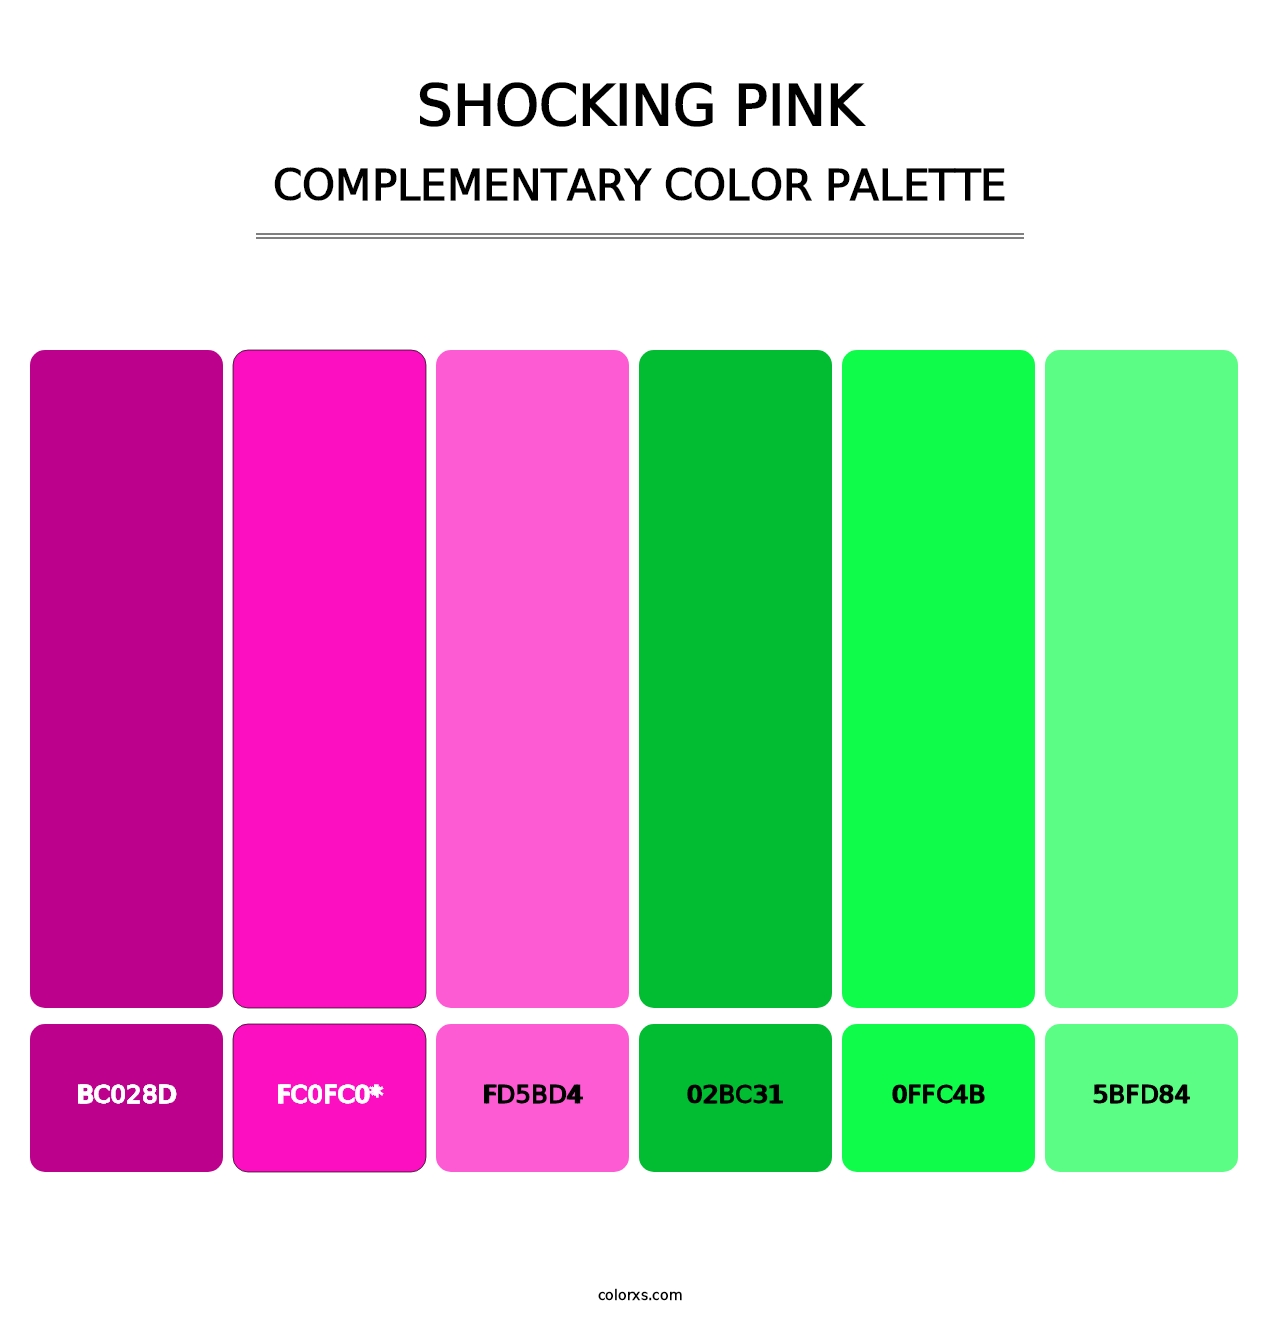 Shocking Pink - Complementary Color Palette